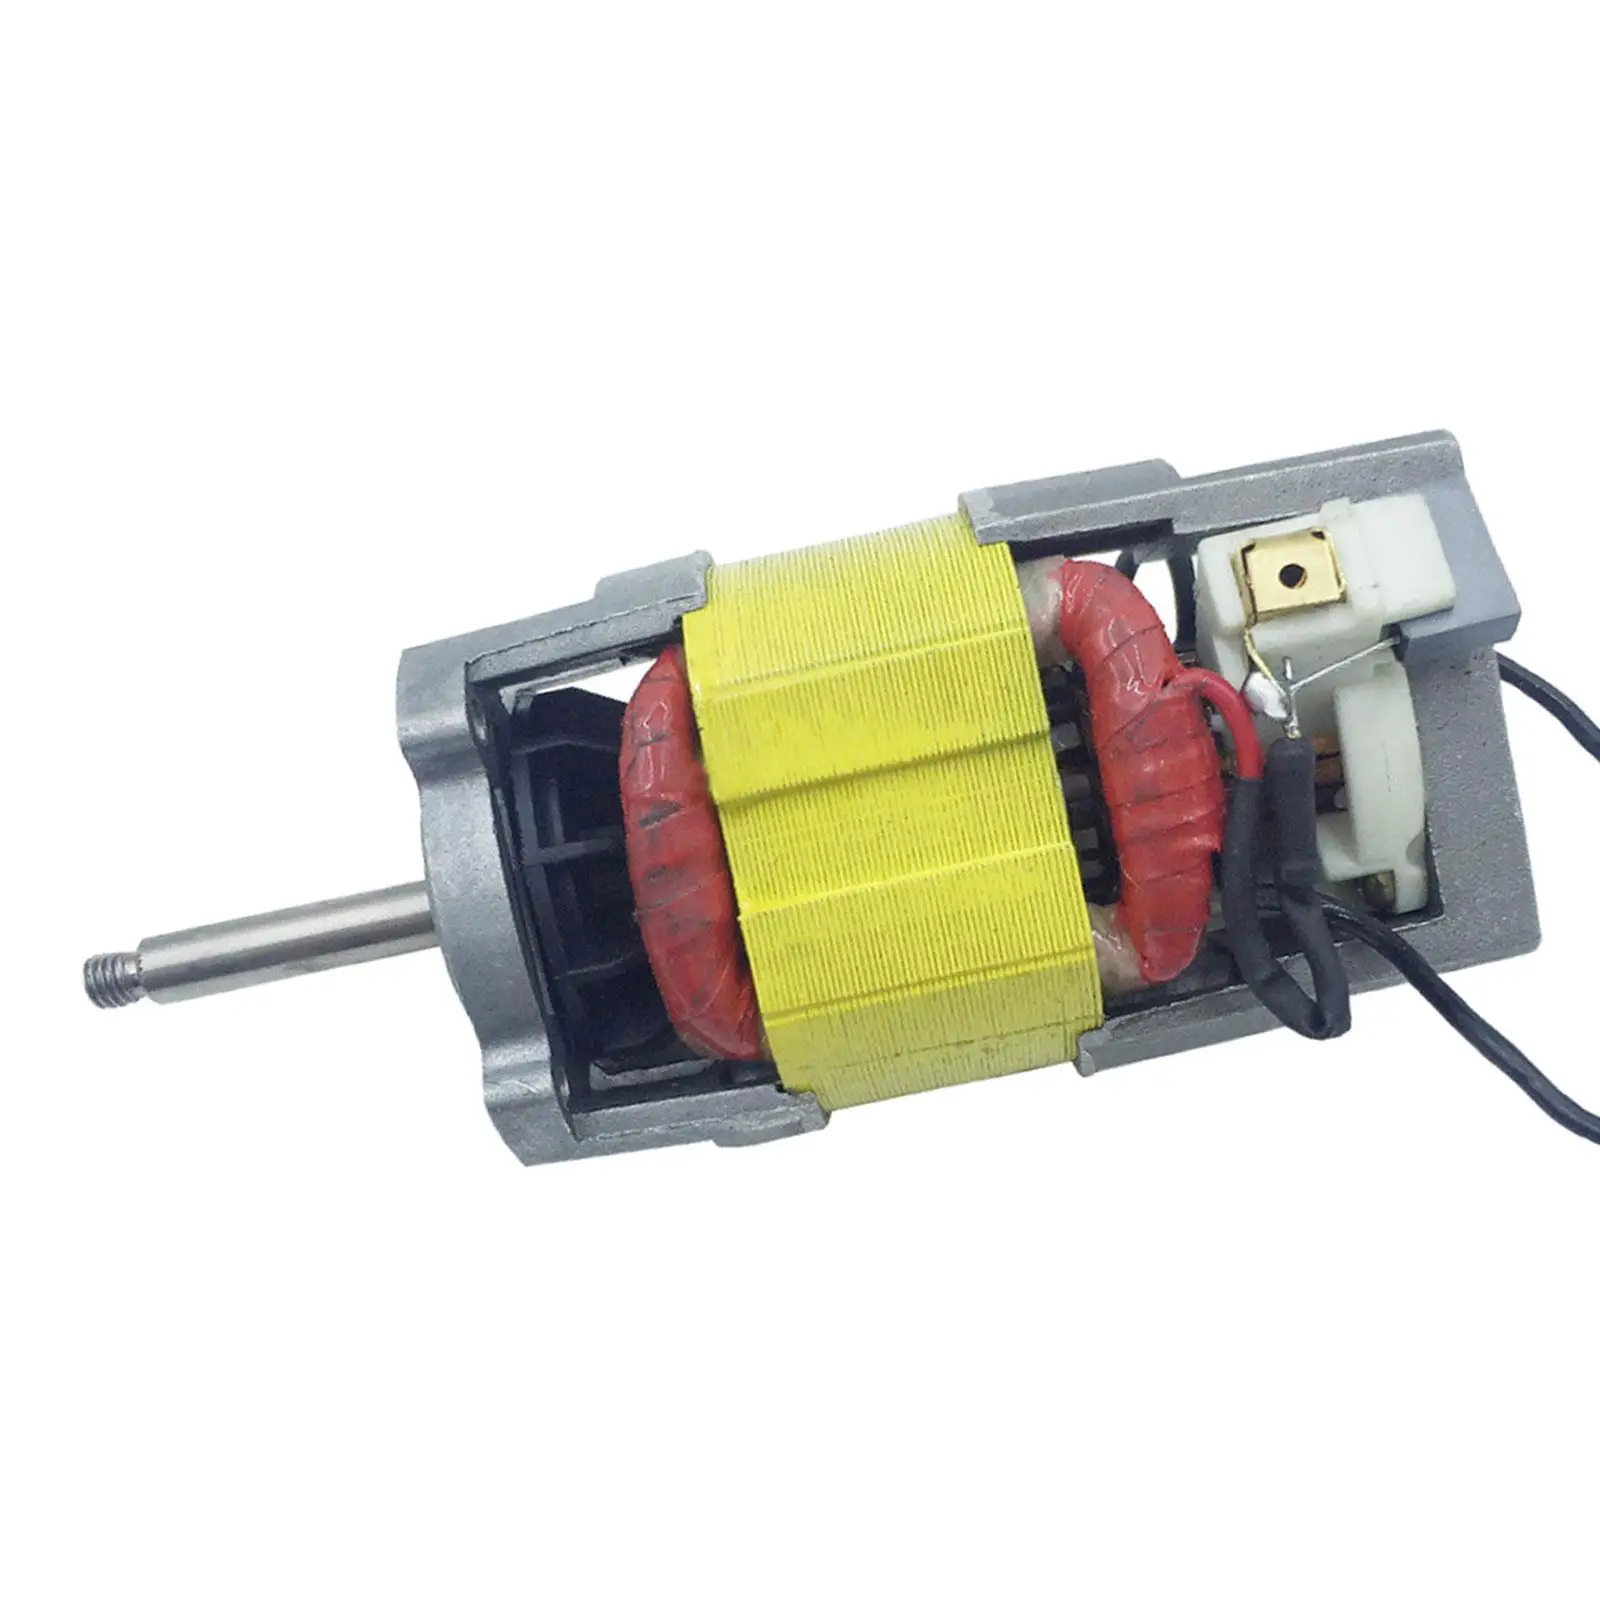 Hot Air Motor for Crafts, Shrinking, Paint for Home Workshop Good Sealing Quality Sand Steel Sheet 1600W Hot Air Motor